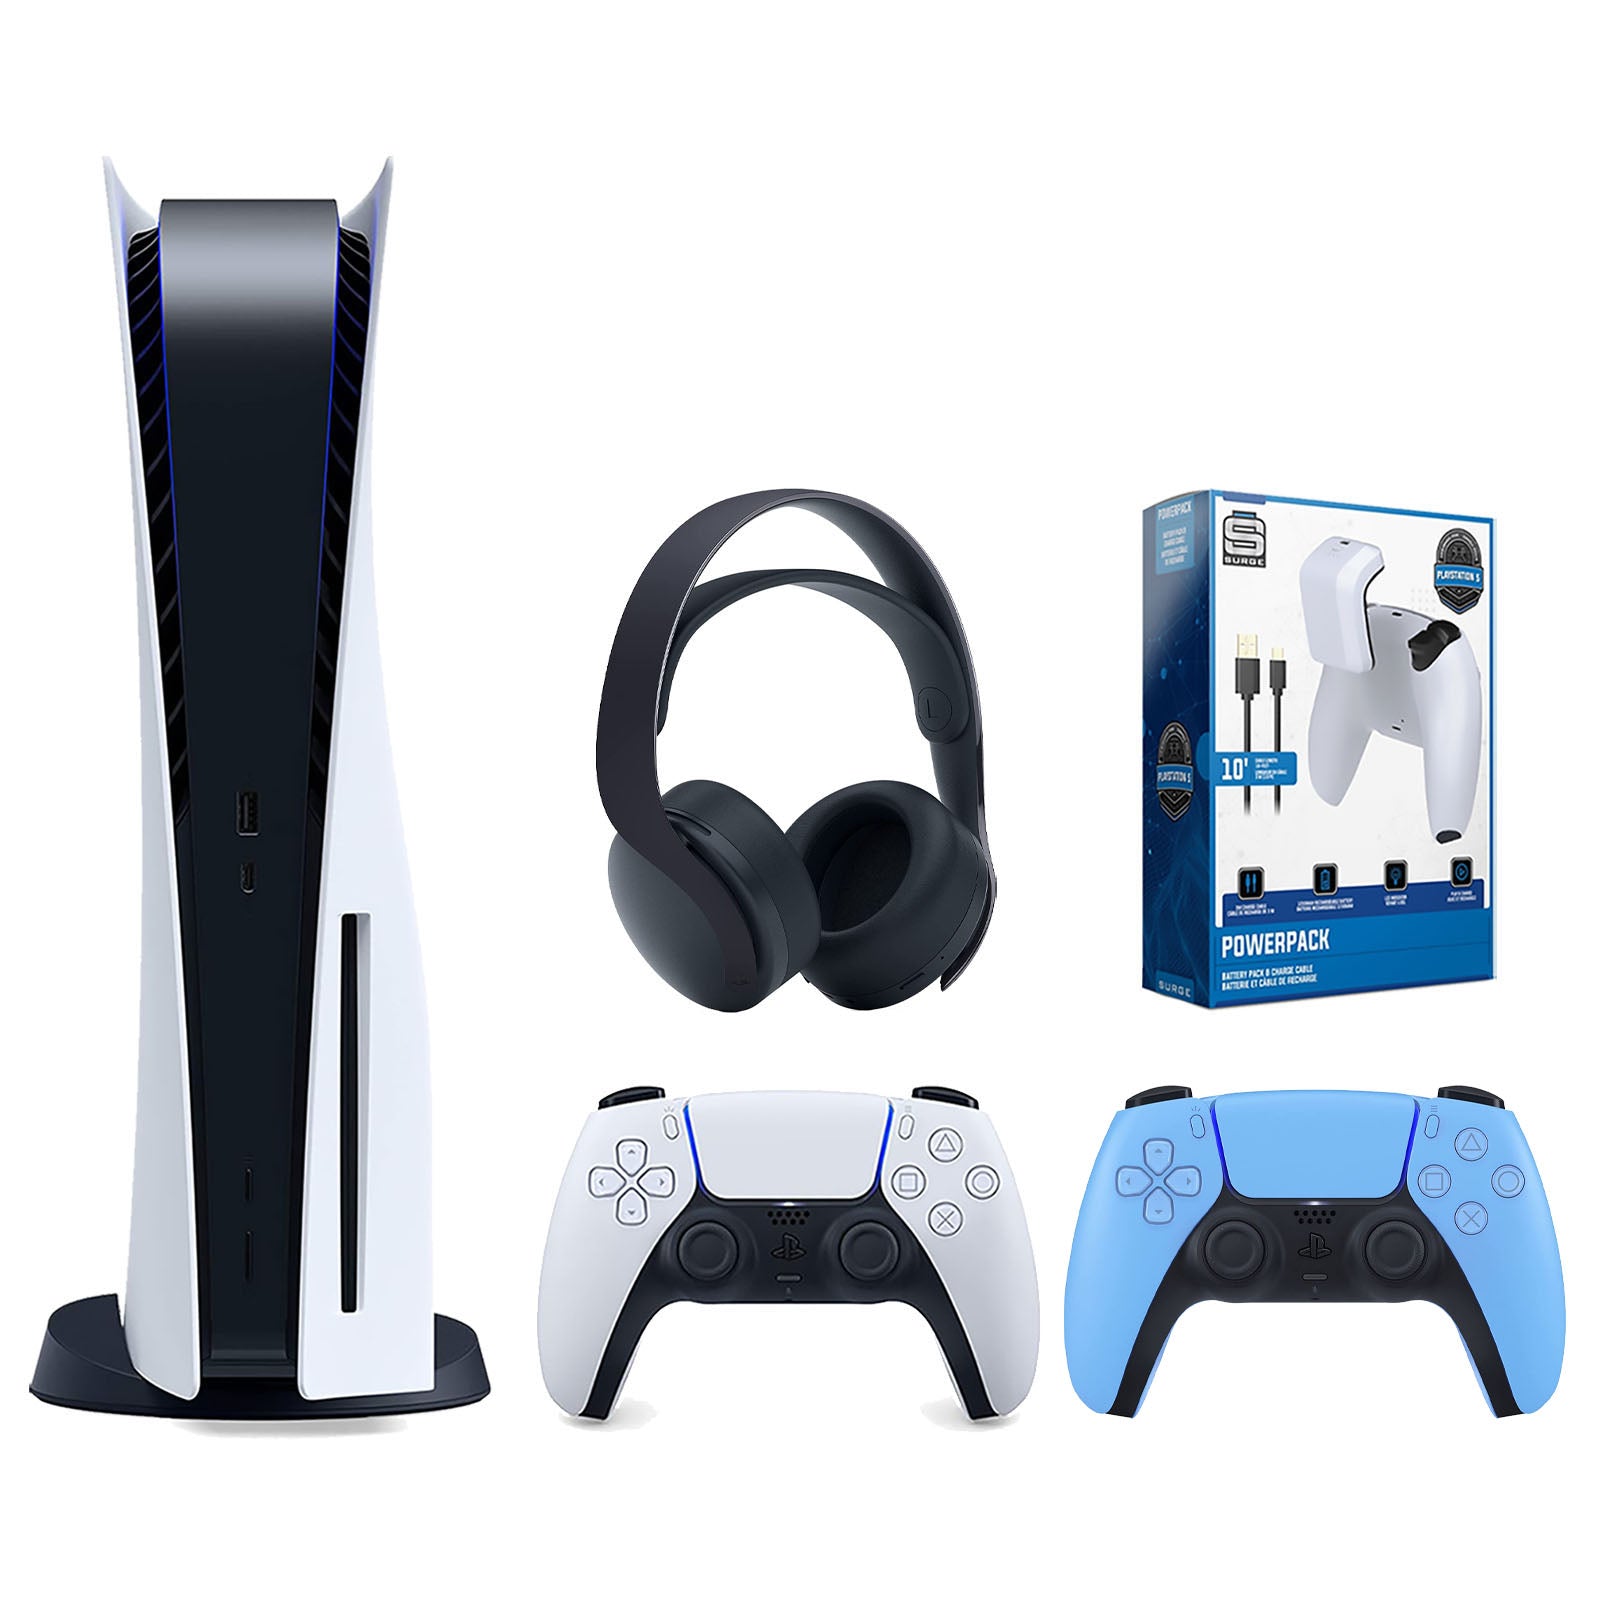 Sony Playstation 5 Disc Version Console with Extra Blue Controller, Black PULSE 3D Headset and Surge PowerPack Battery Pack & Charge Cable Bundle - Pro-Distributing